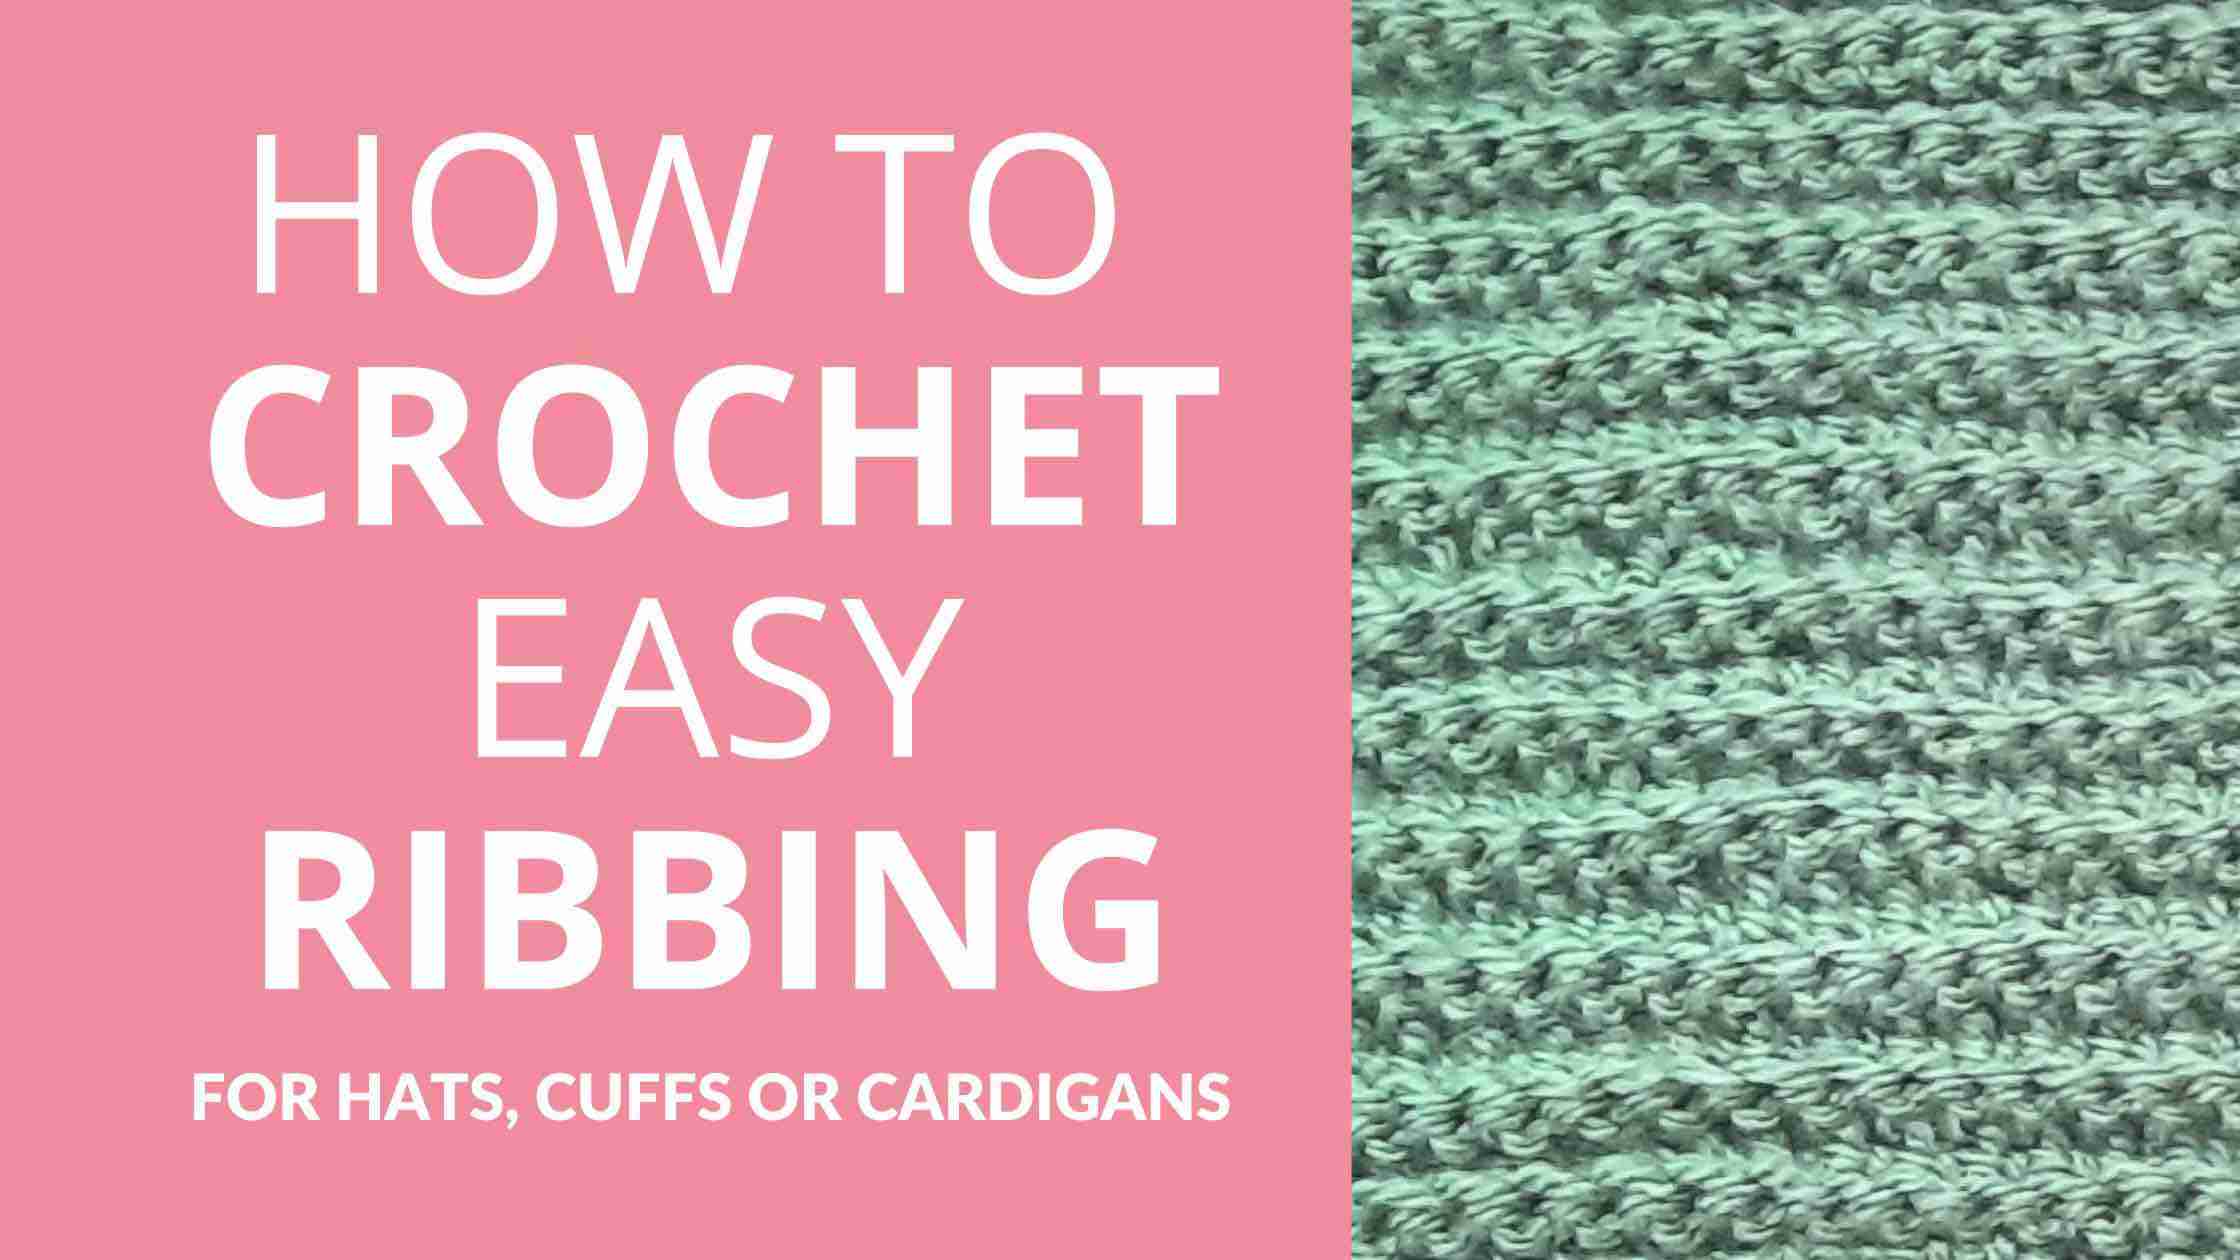 How to crochet easy ribbing for hats, cuffs and cardigans